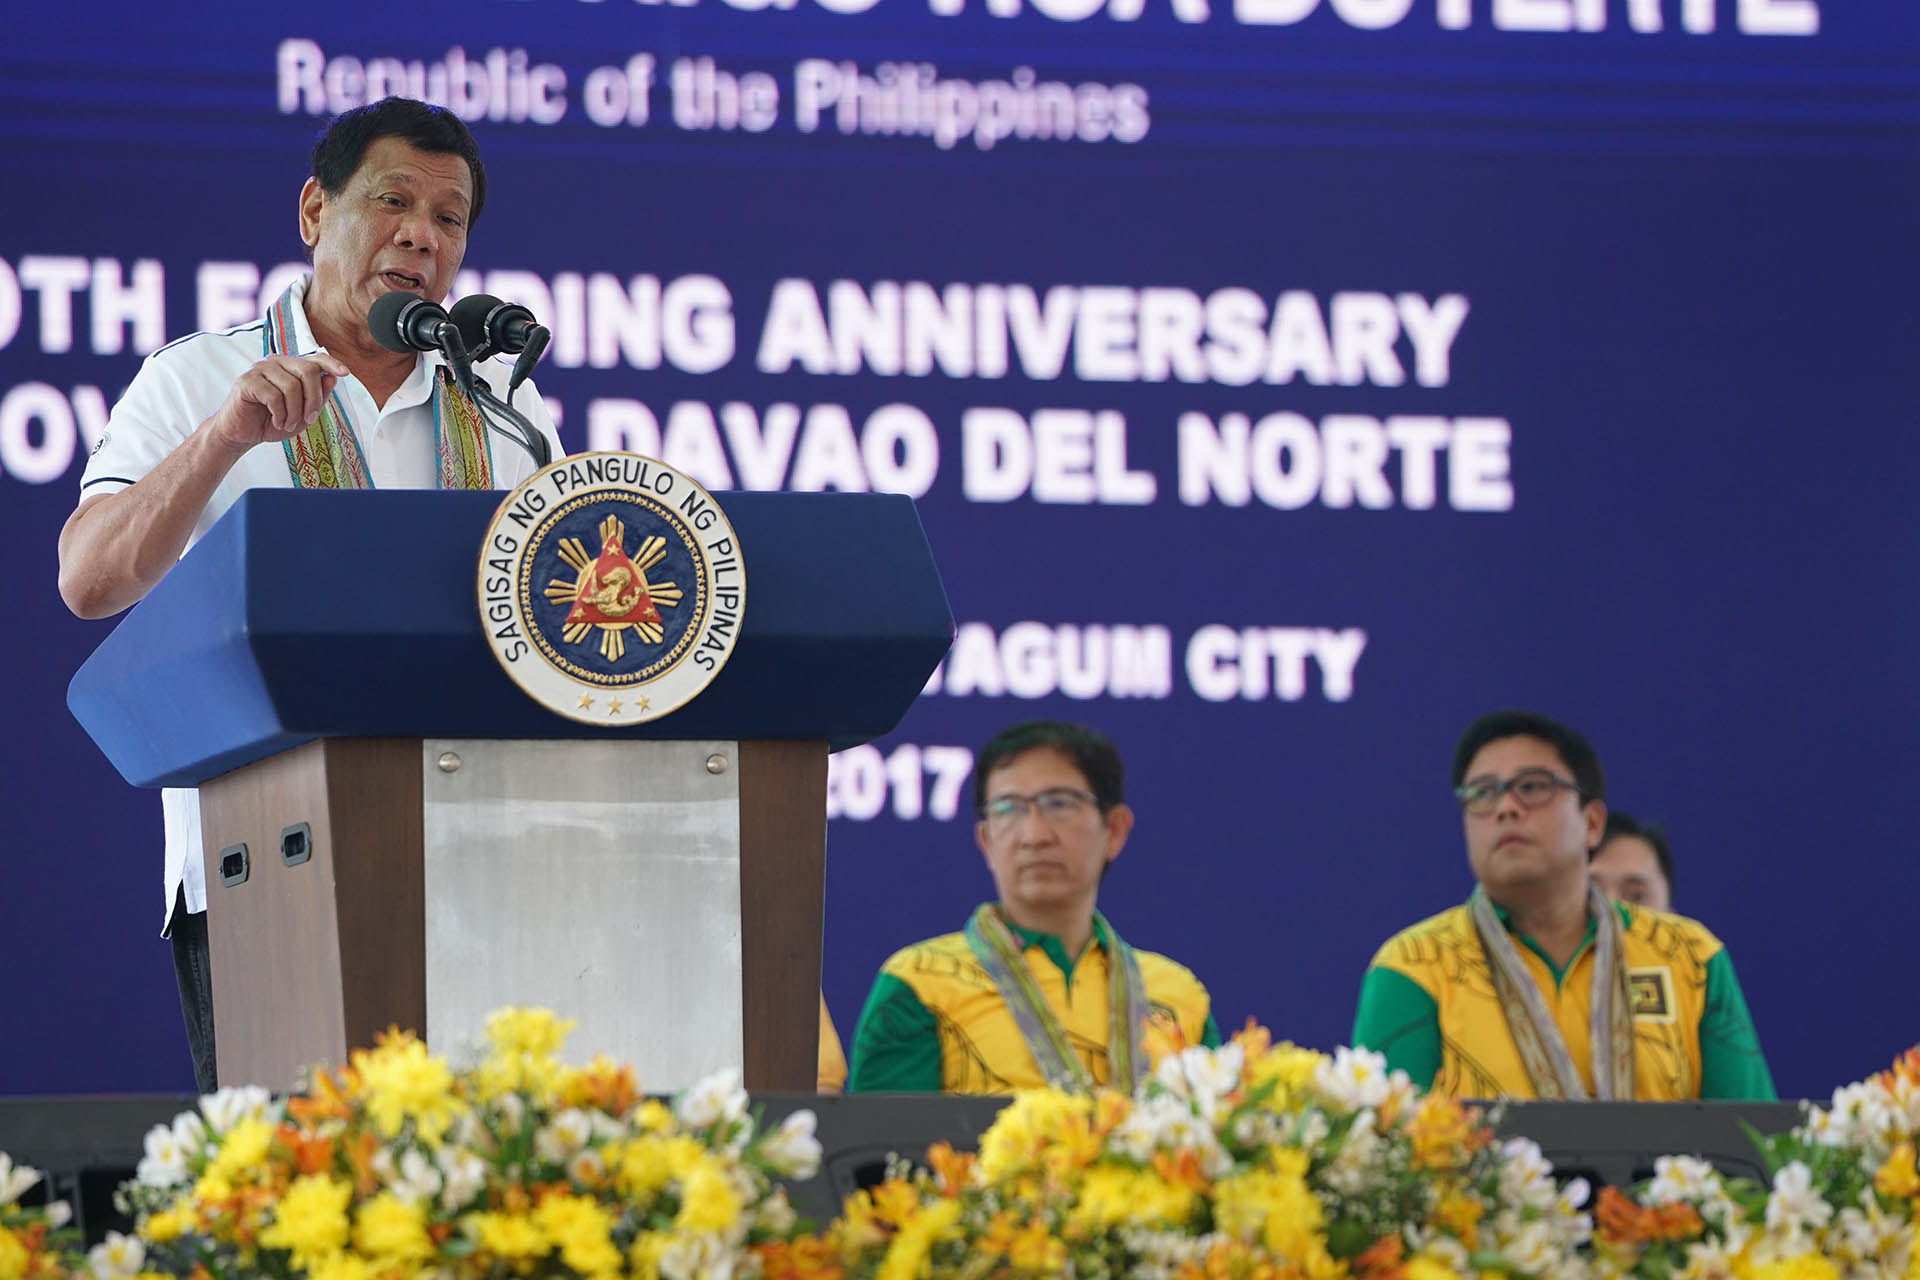 EXPOSE. President Rodrigo Duterte says he will make an 'expose' against the Philippine Daily Inquirer at the 50th founding anniversary of Davao del Norte in Tagum City on July 1, 2017. Photo by Joey Dalumpines/Presidential Photo 